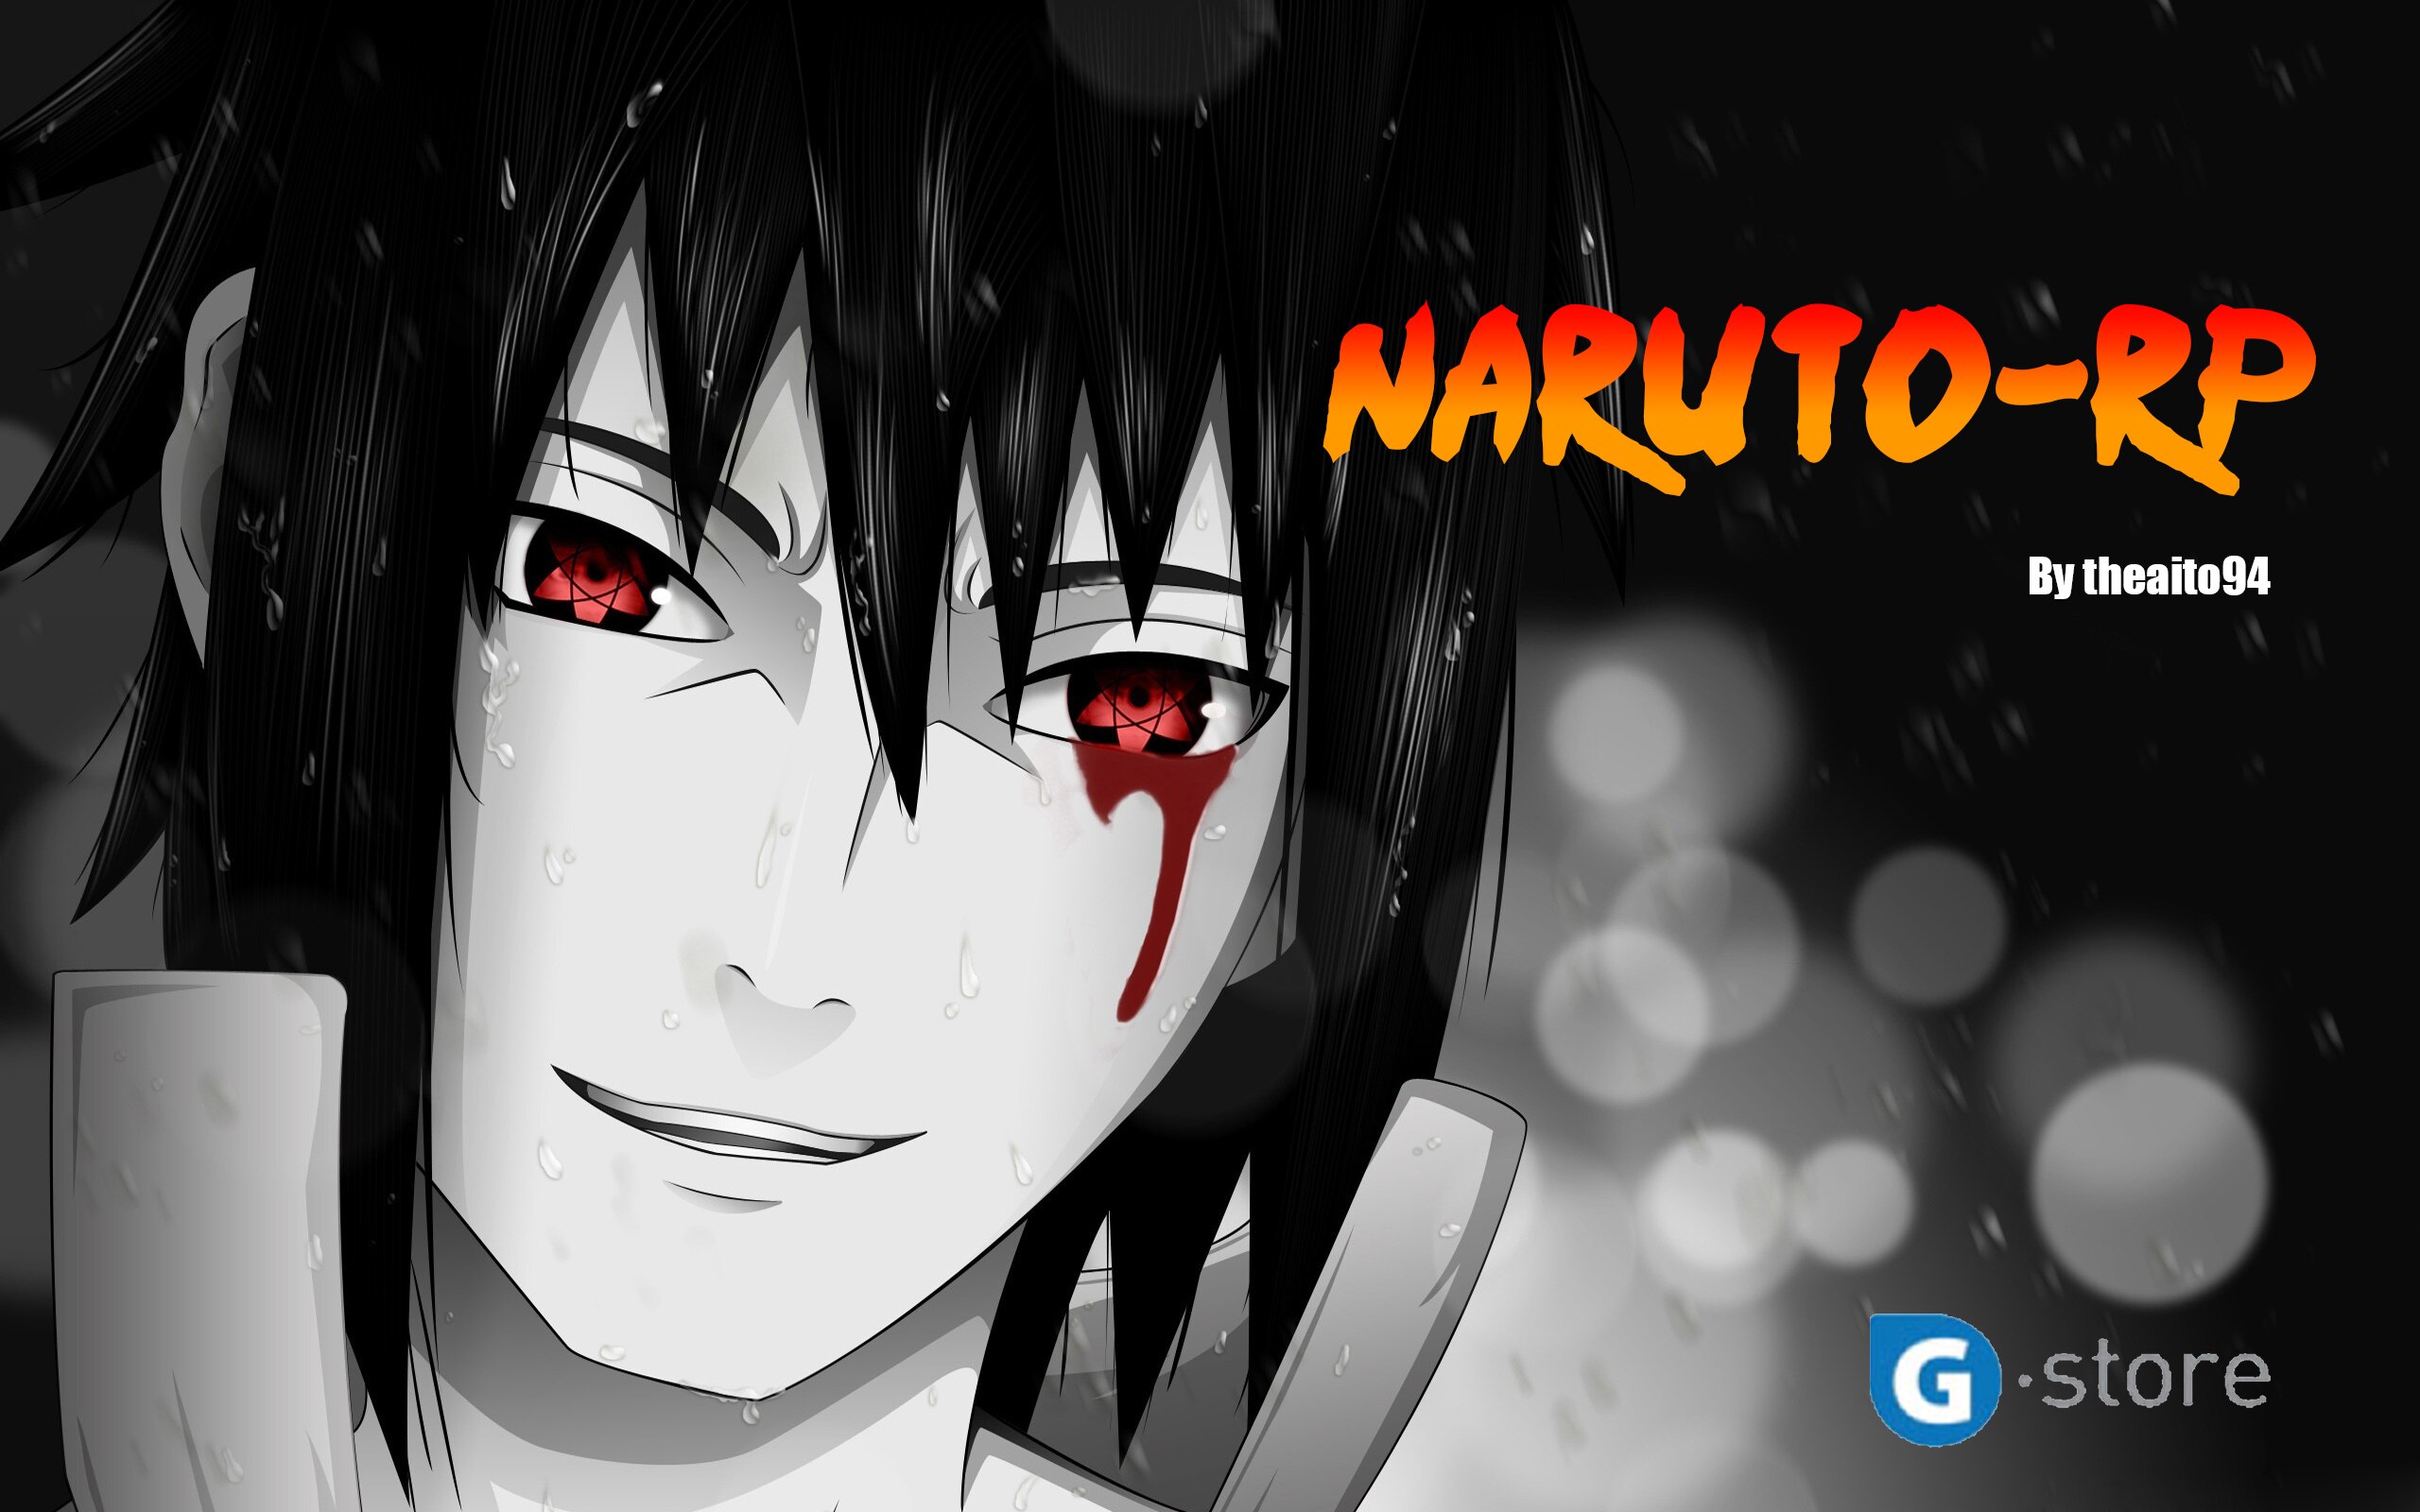 Hello Guys! I made a naruto roleplay discord server, the lore is